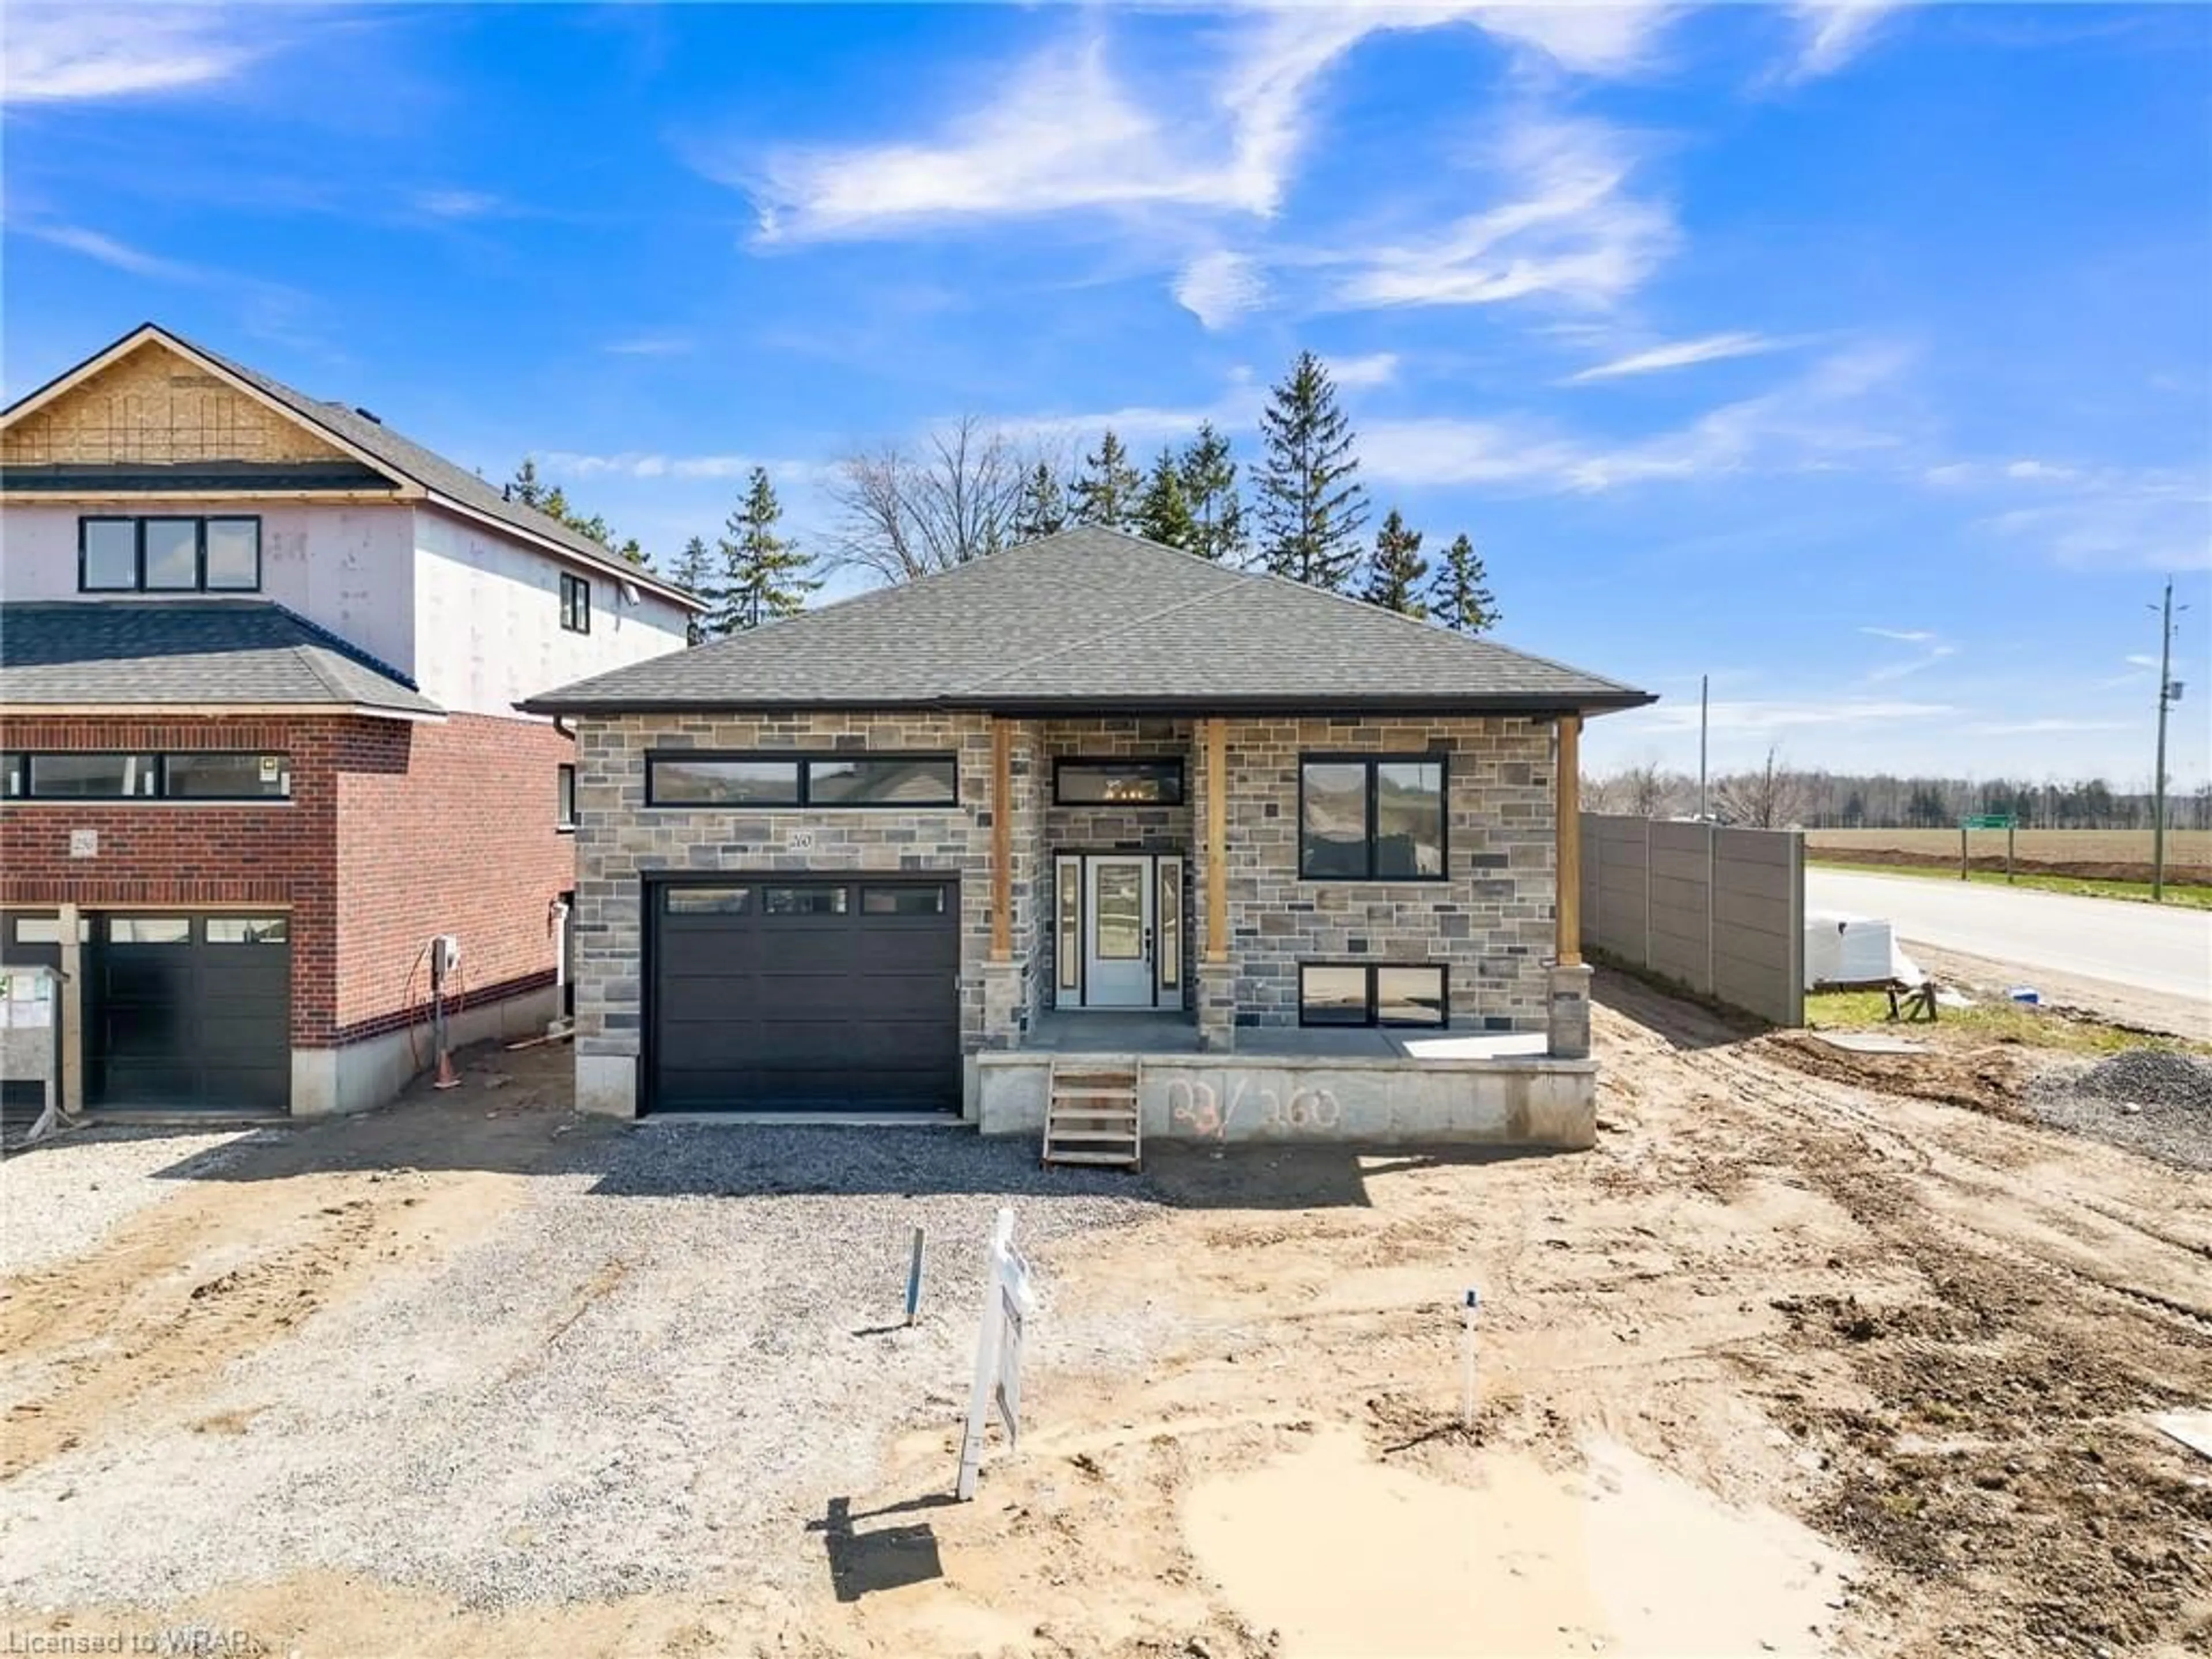 Home with brick exterior material for 260 Timber Trail Rd, Elmira Ontario N3B 0C7